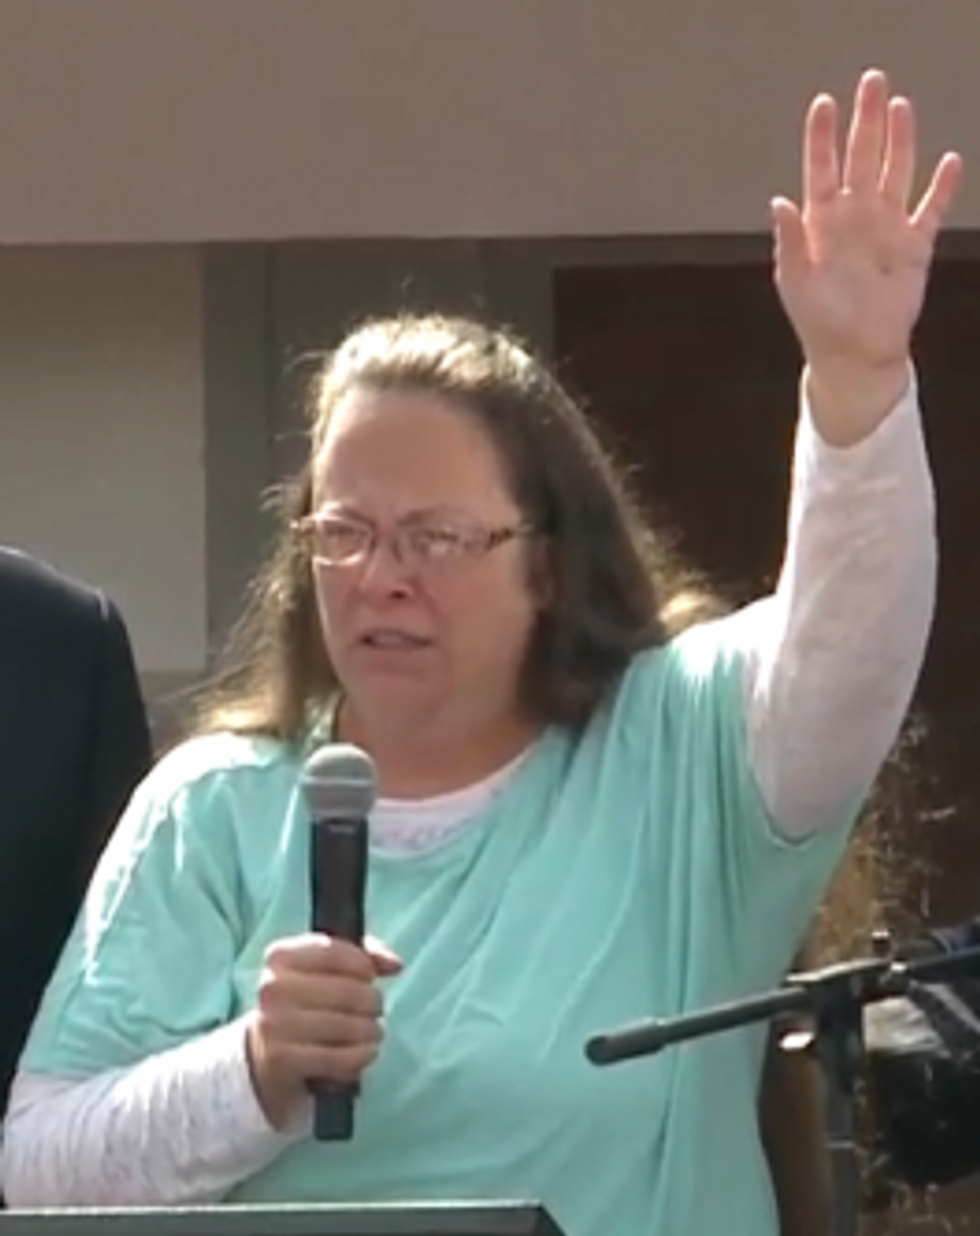 Who Wouldn't Want To Jerk Off To Kim Davis Erotica?